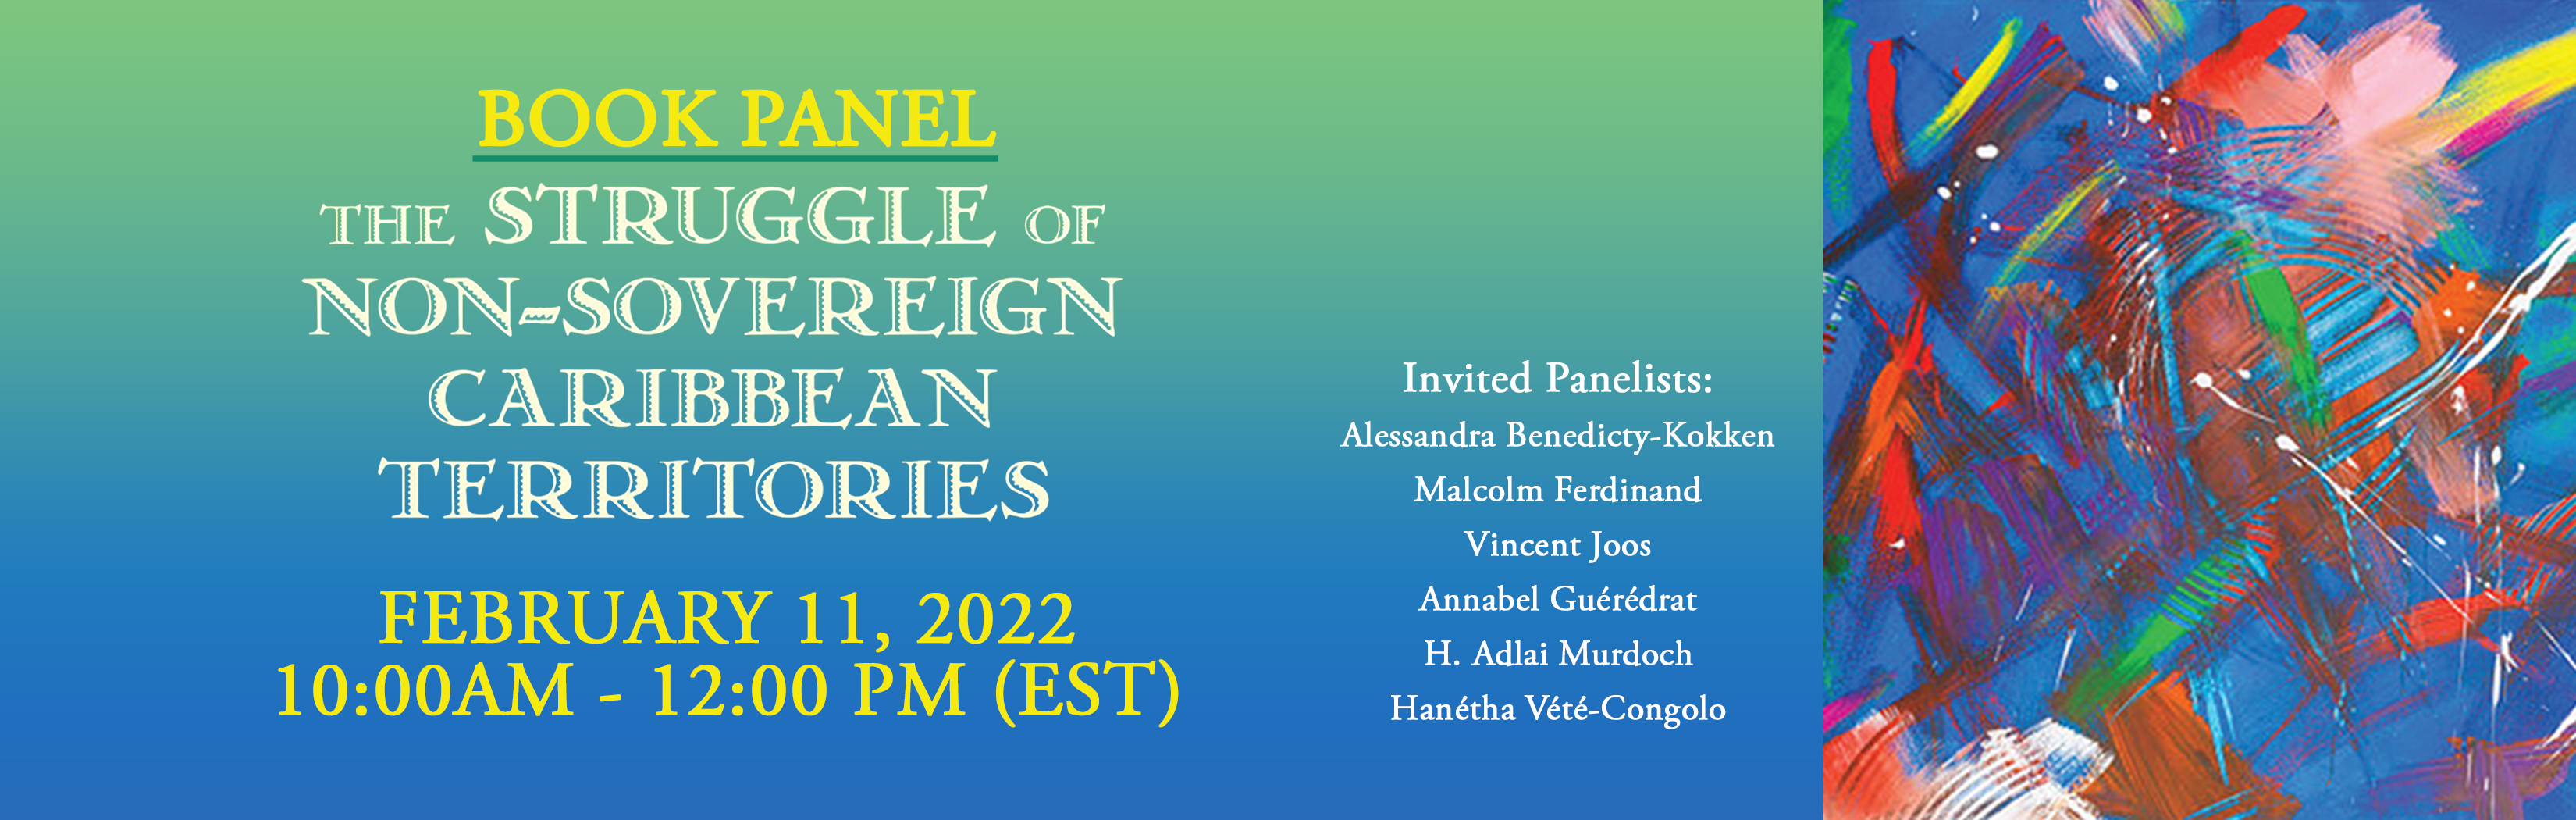 Book Panel: The Struggle of Non-Sovereign Caribbean Territories 